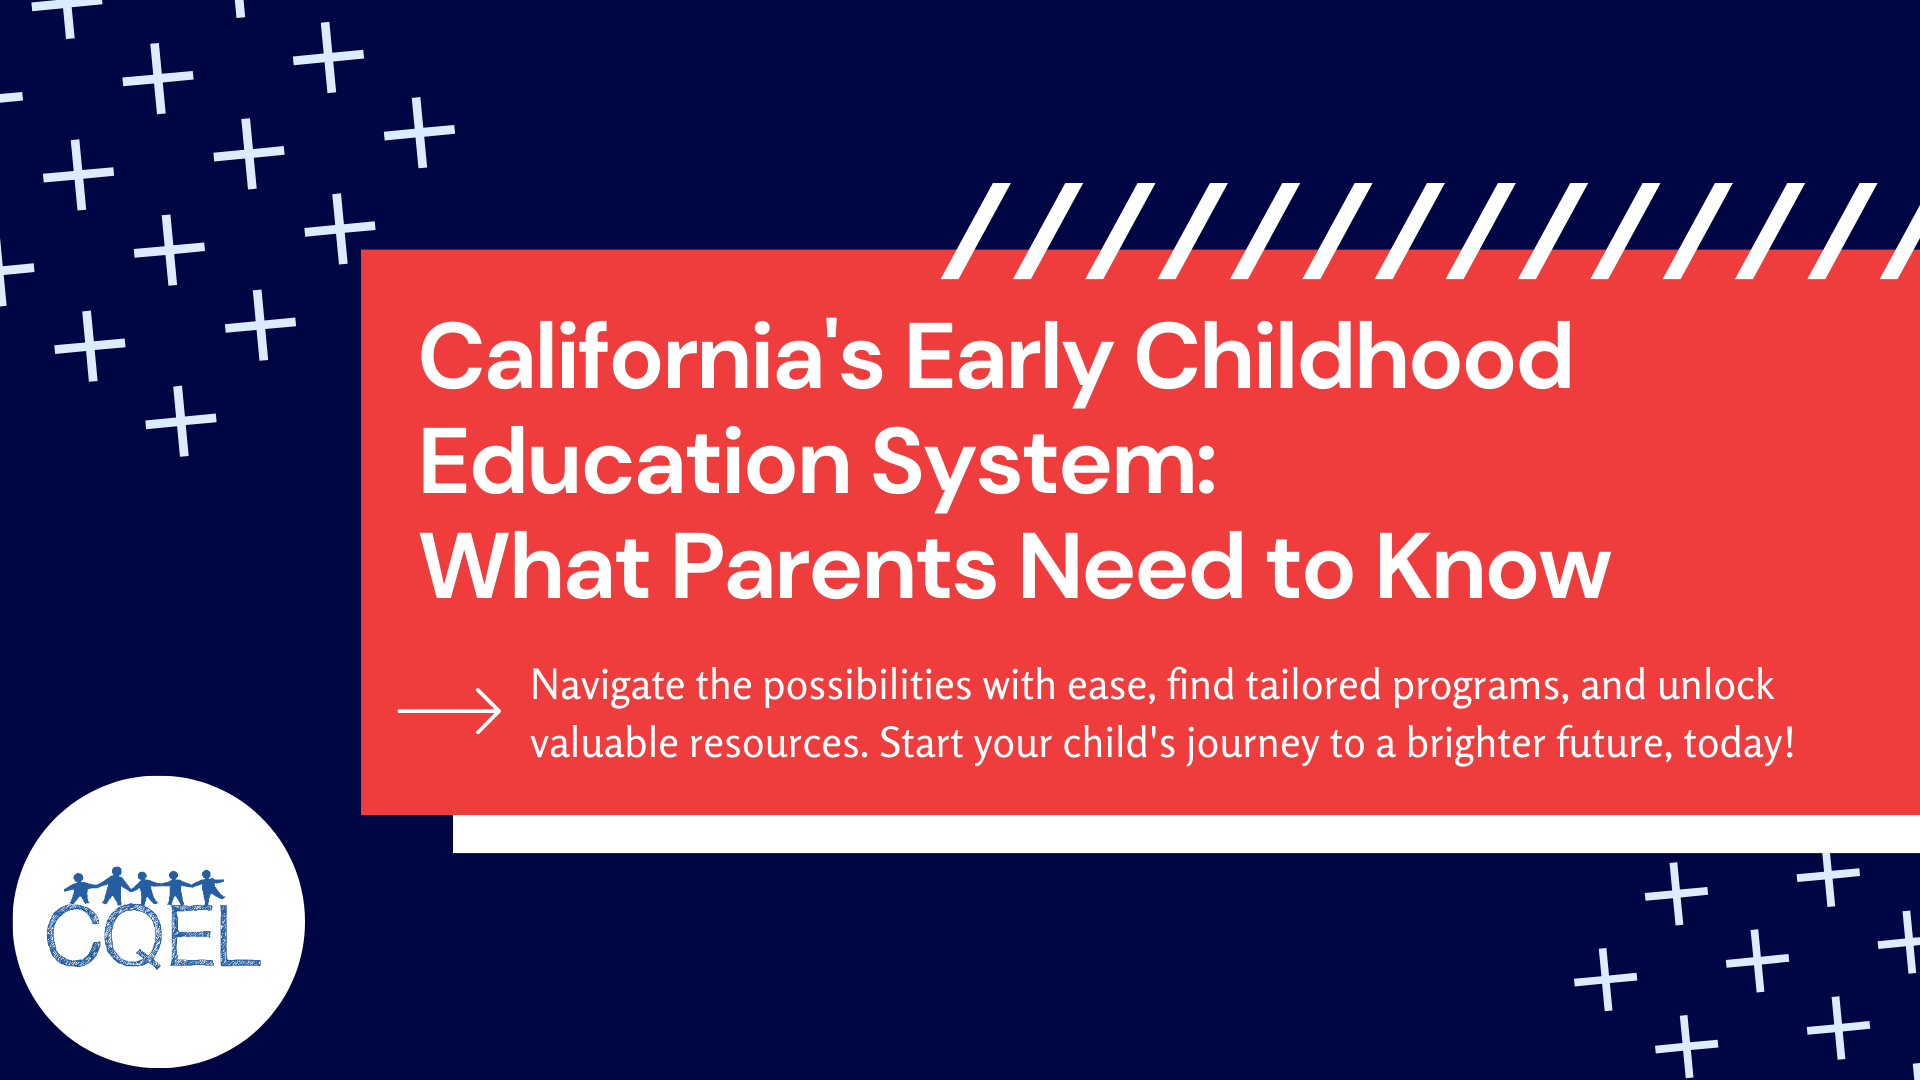 California's Early Childhood Education System: What Parents Need to Know